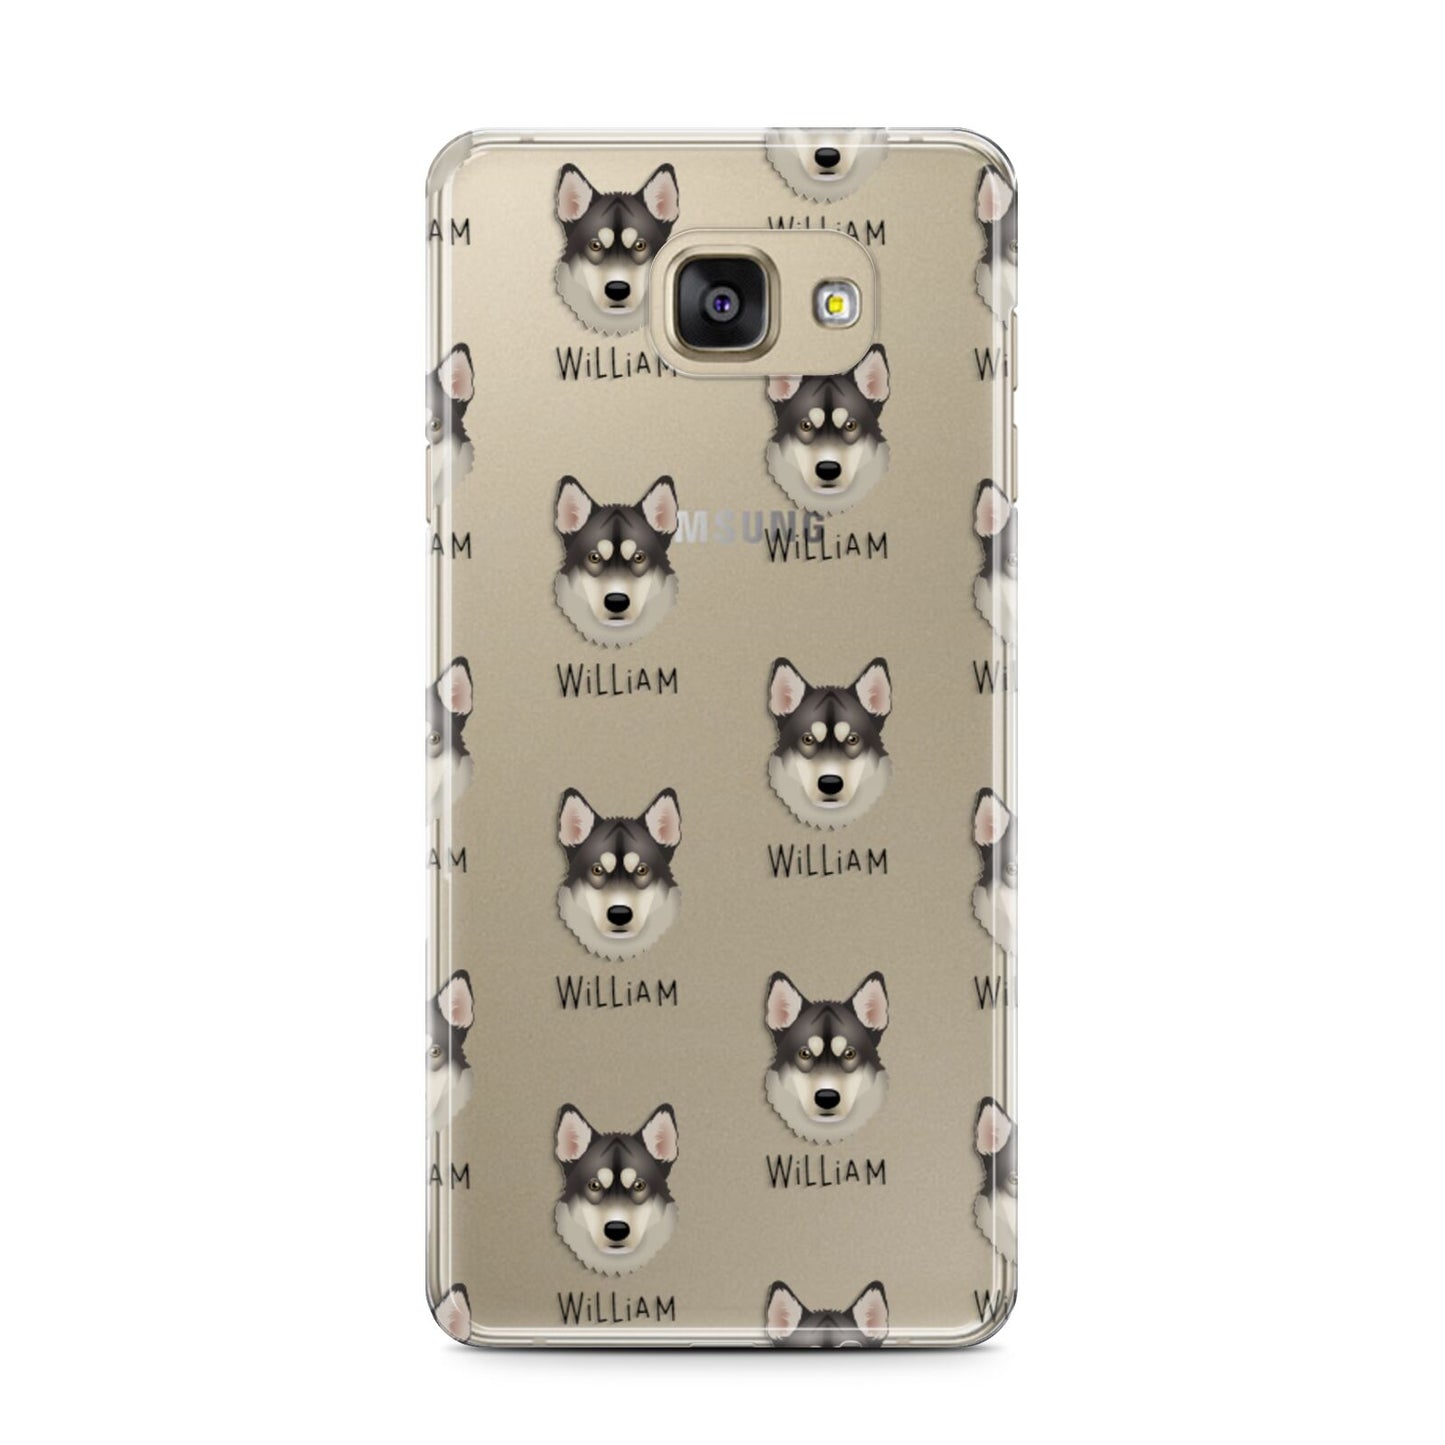 Tamaskan Icon with Name Samsung Galaxy A7 2016 Case on gold phone